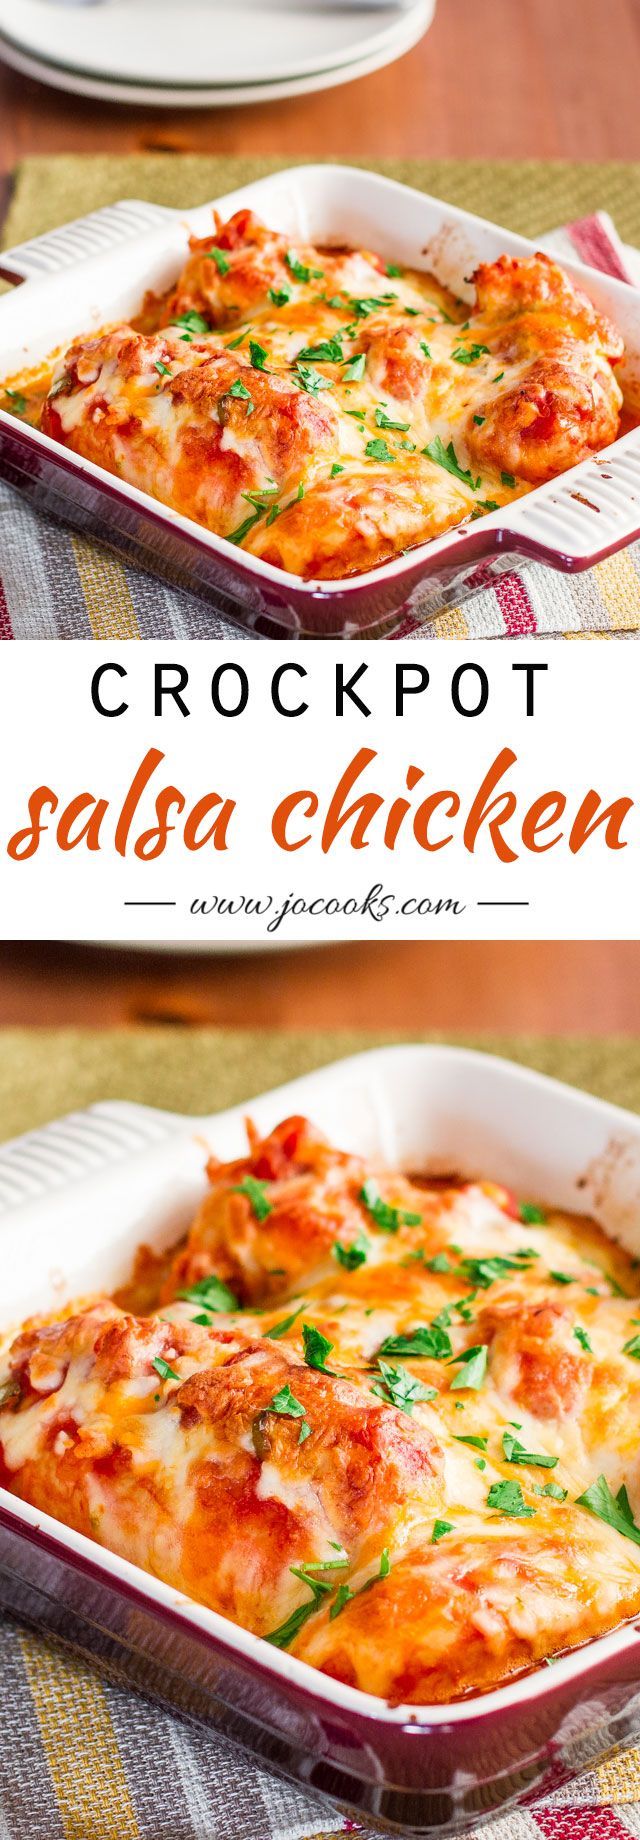 Crockpot Salsa Chicken. Place whole chicken breasts in your crockpot and pour the salsa over it. Cook anywhere from 1½ to 2 hours